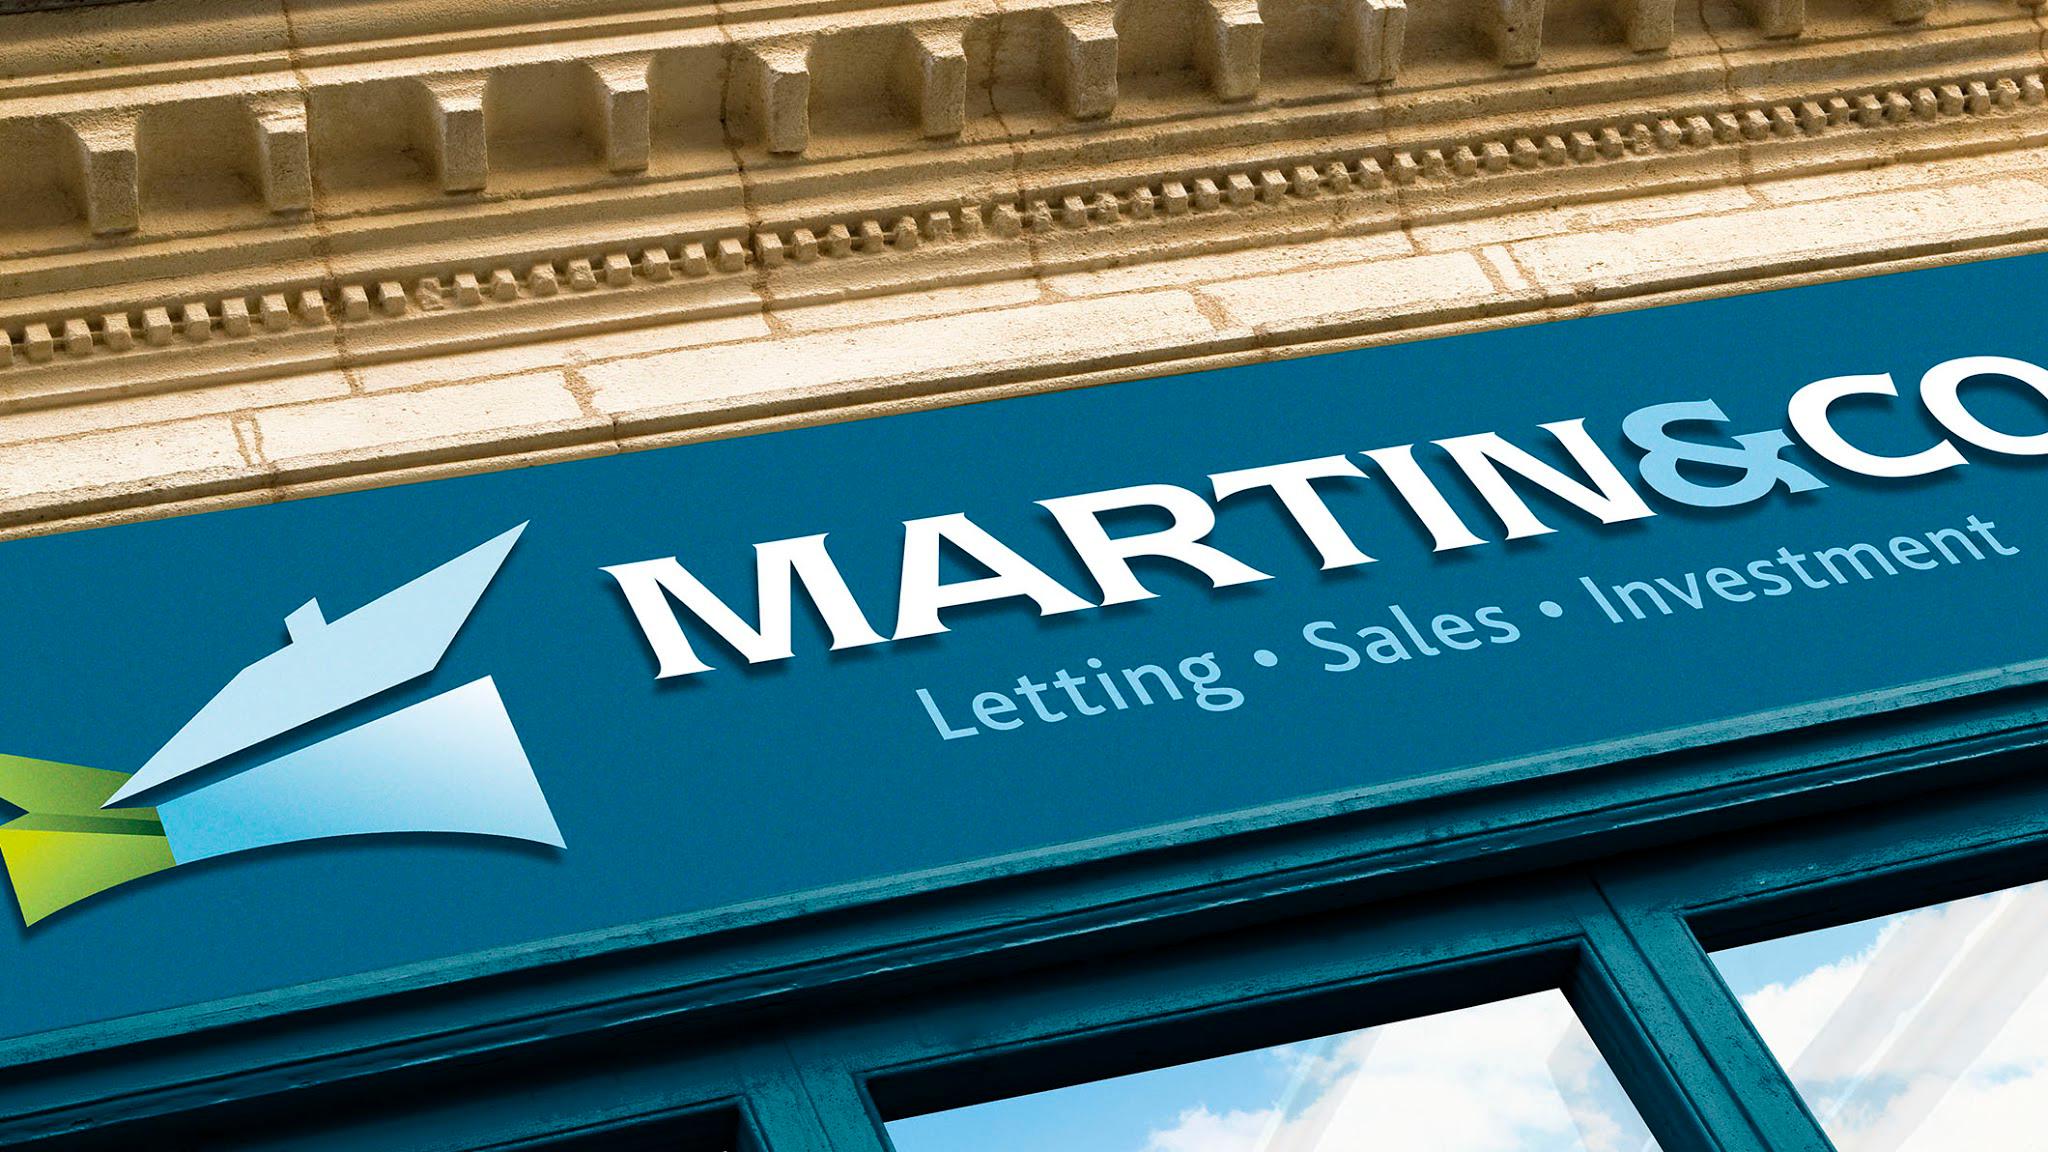 Images Martin & Co Maidstone Lettings & Estate Agents